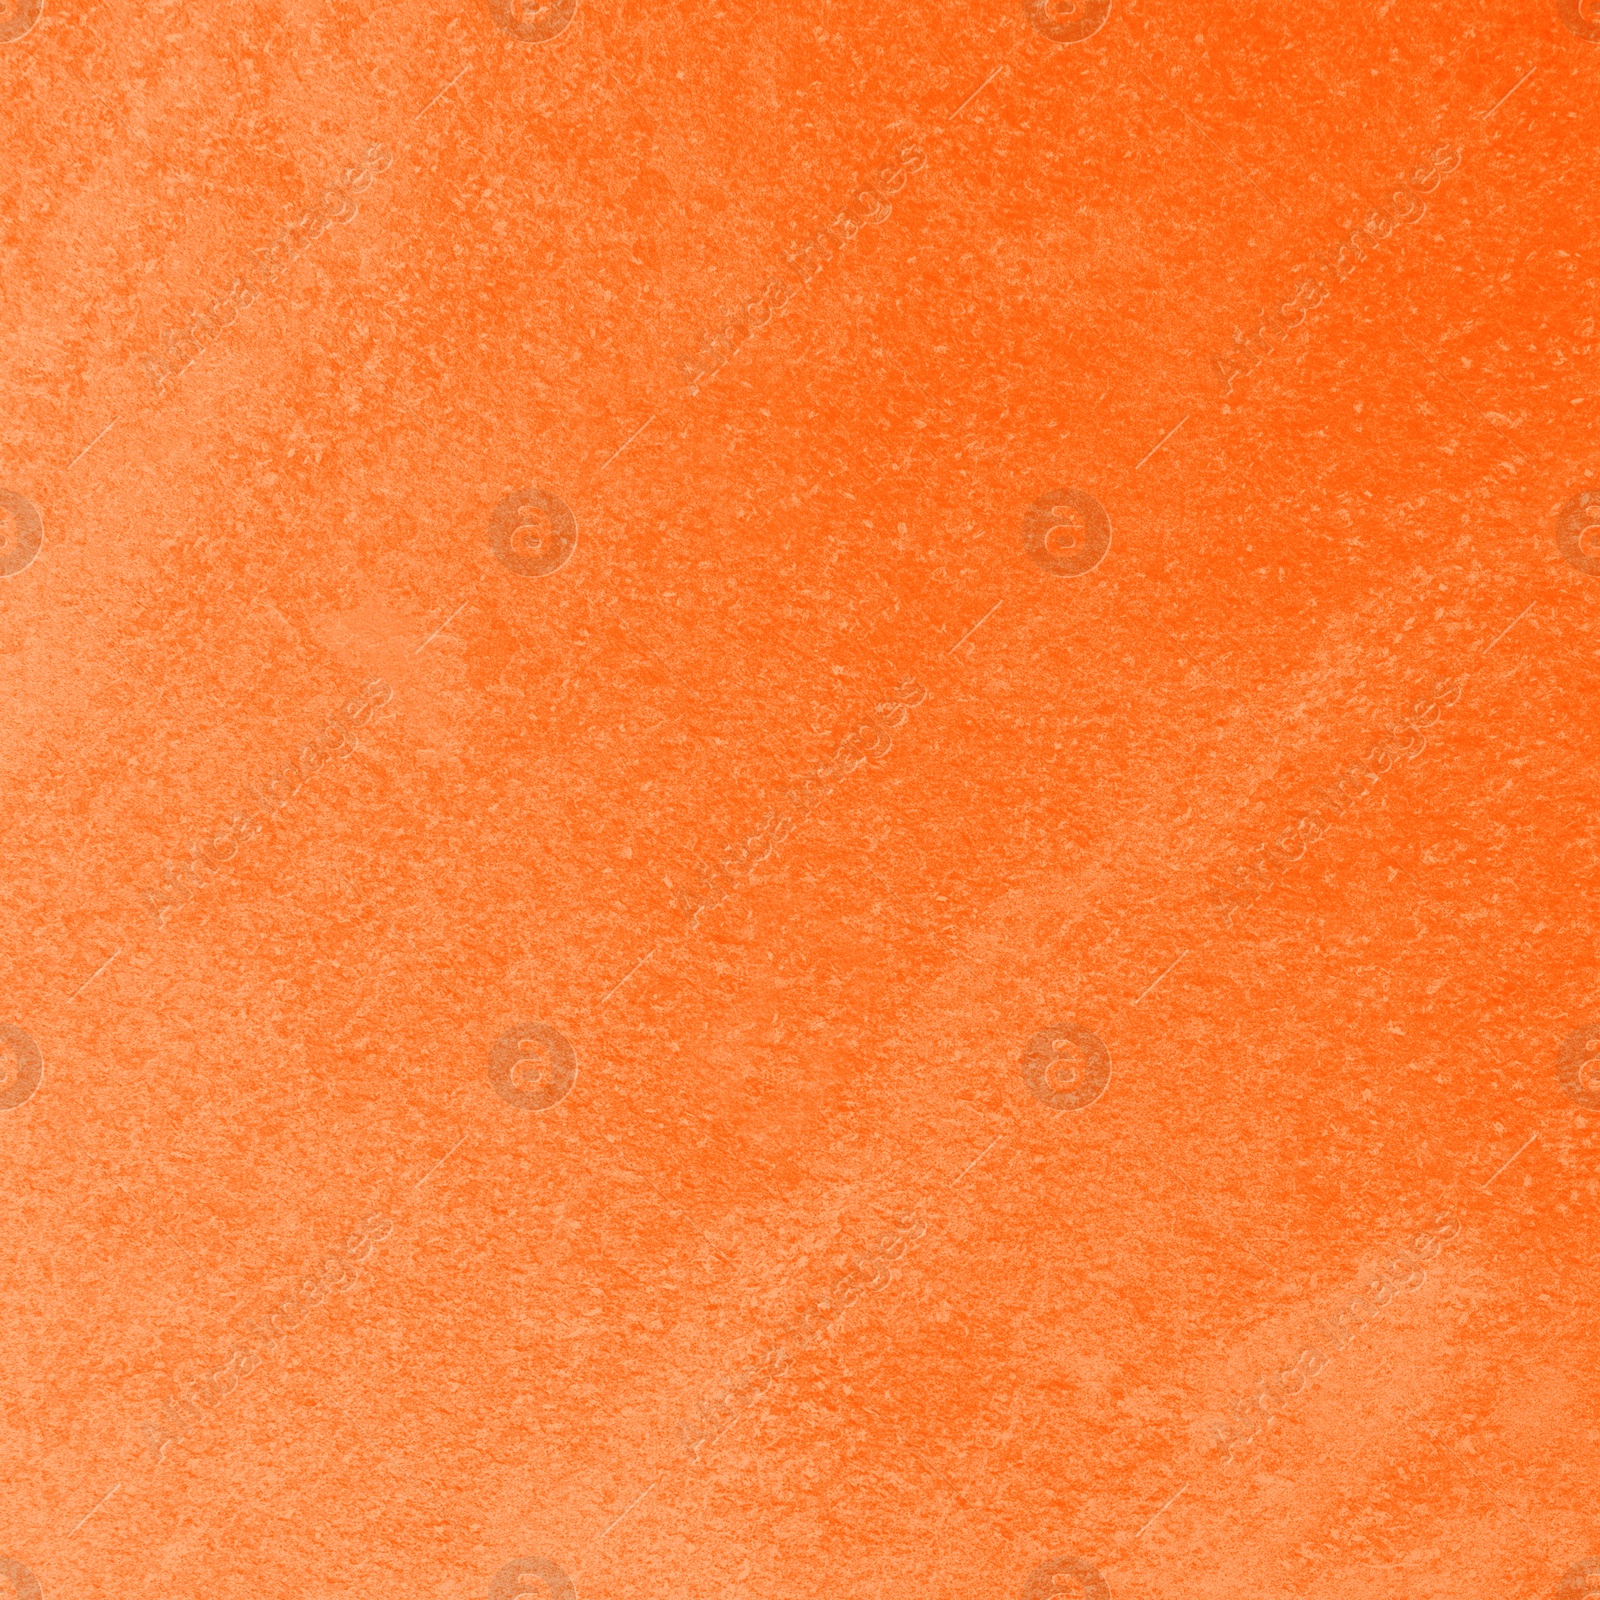 Image of Texture of concrete surface painted in orange color as background